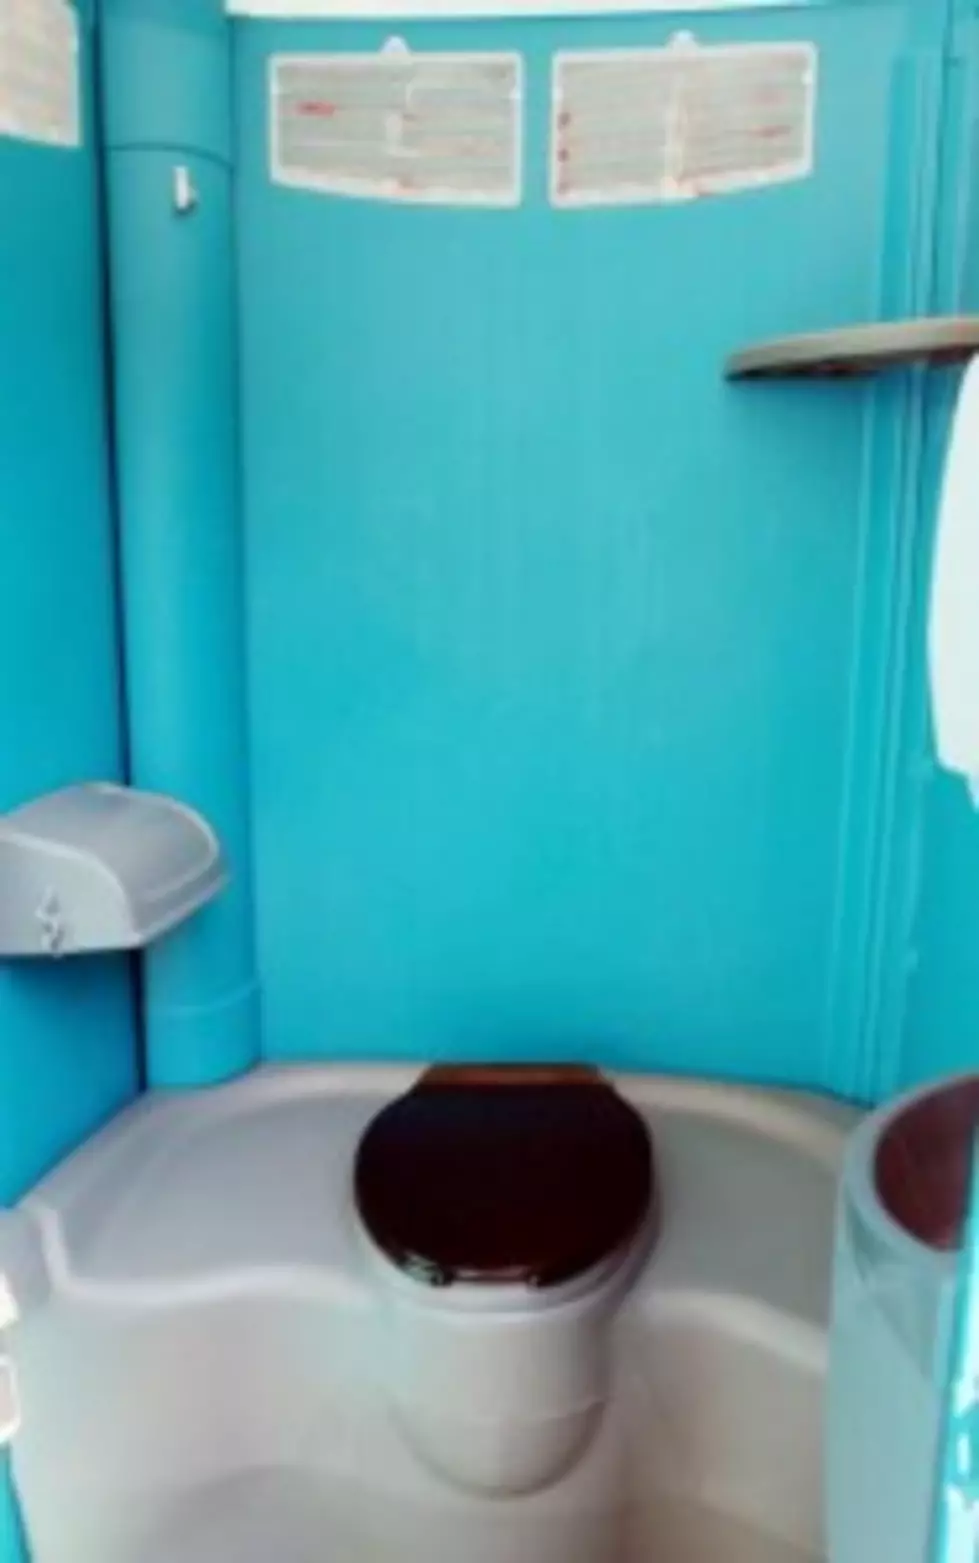 Drunk Guy Covers Himself in Crap Inside Porta Potty to Evade Cops